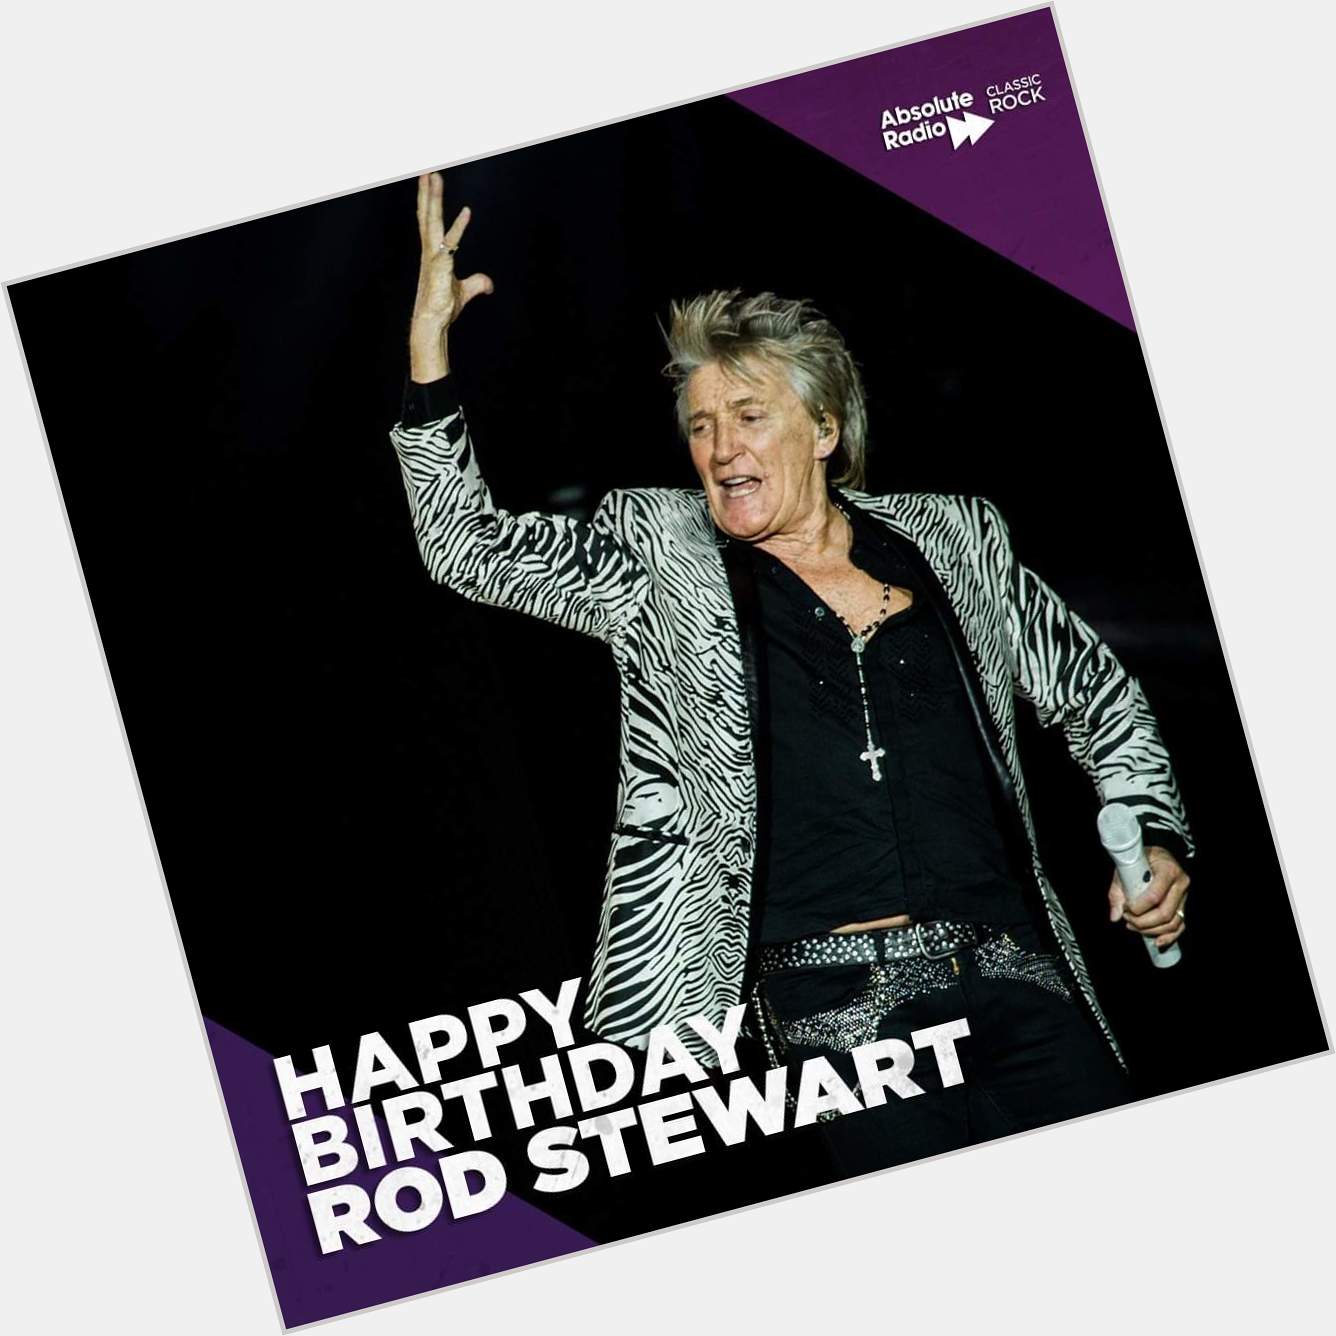 Rod Stewart, one of the iconic voices in British rock turns 76 today. Happy birthday Sir Rod! 